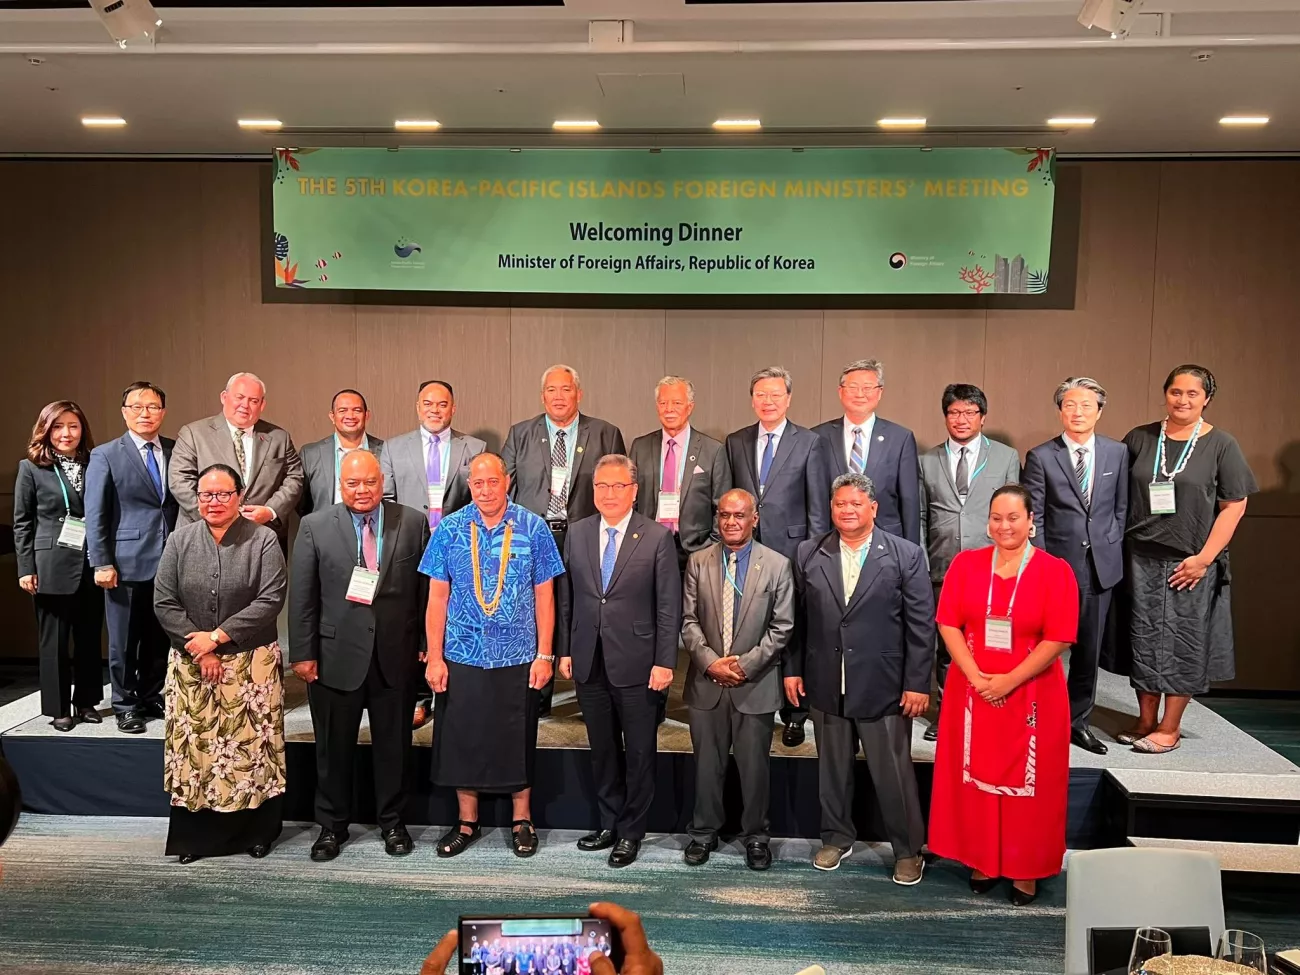 Korea-Pacific Islands Foreign Ministers emphasise importance of utilising existing regional mechanisms for co-operation and partnership